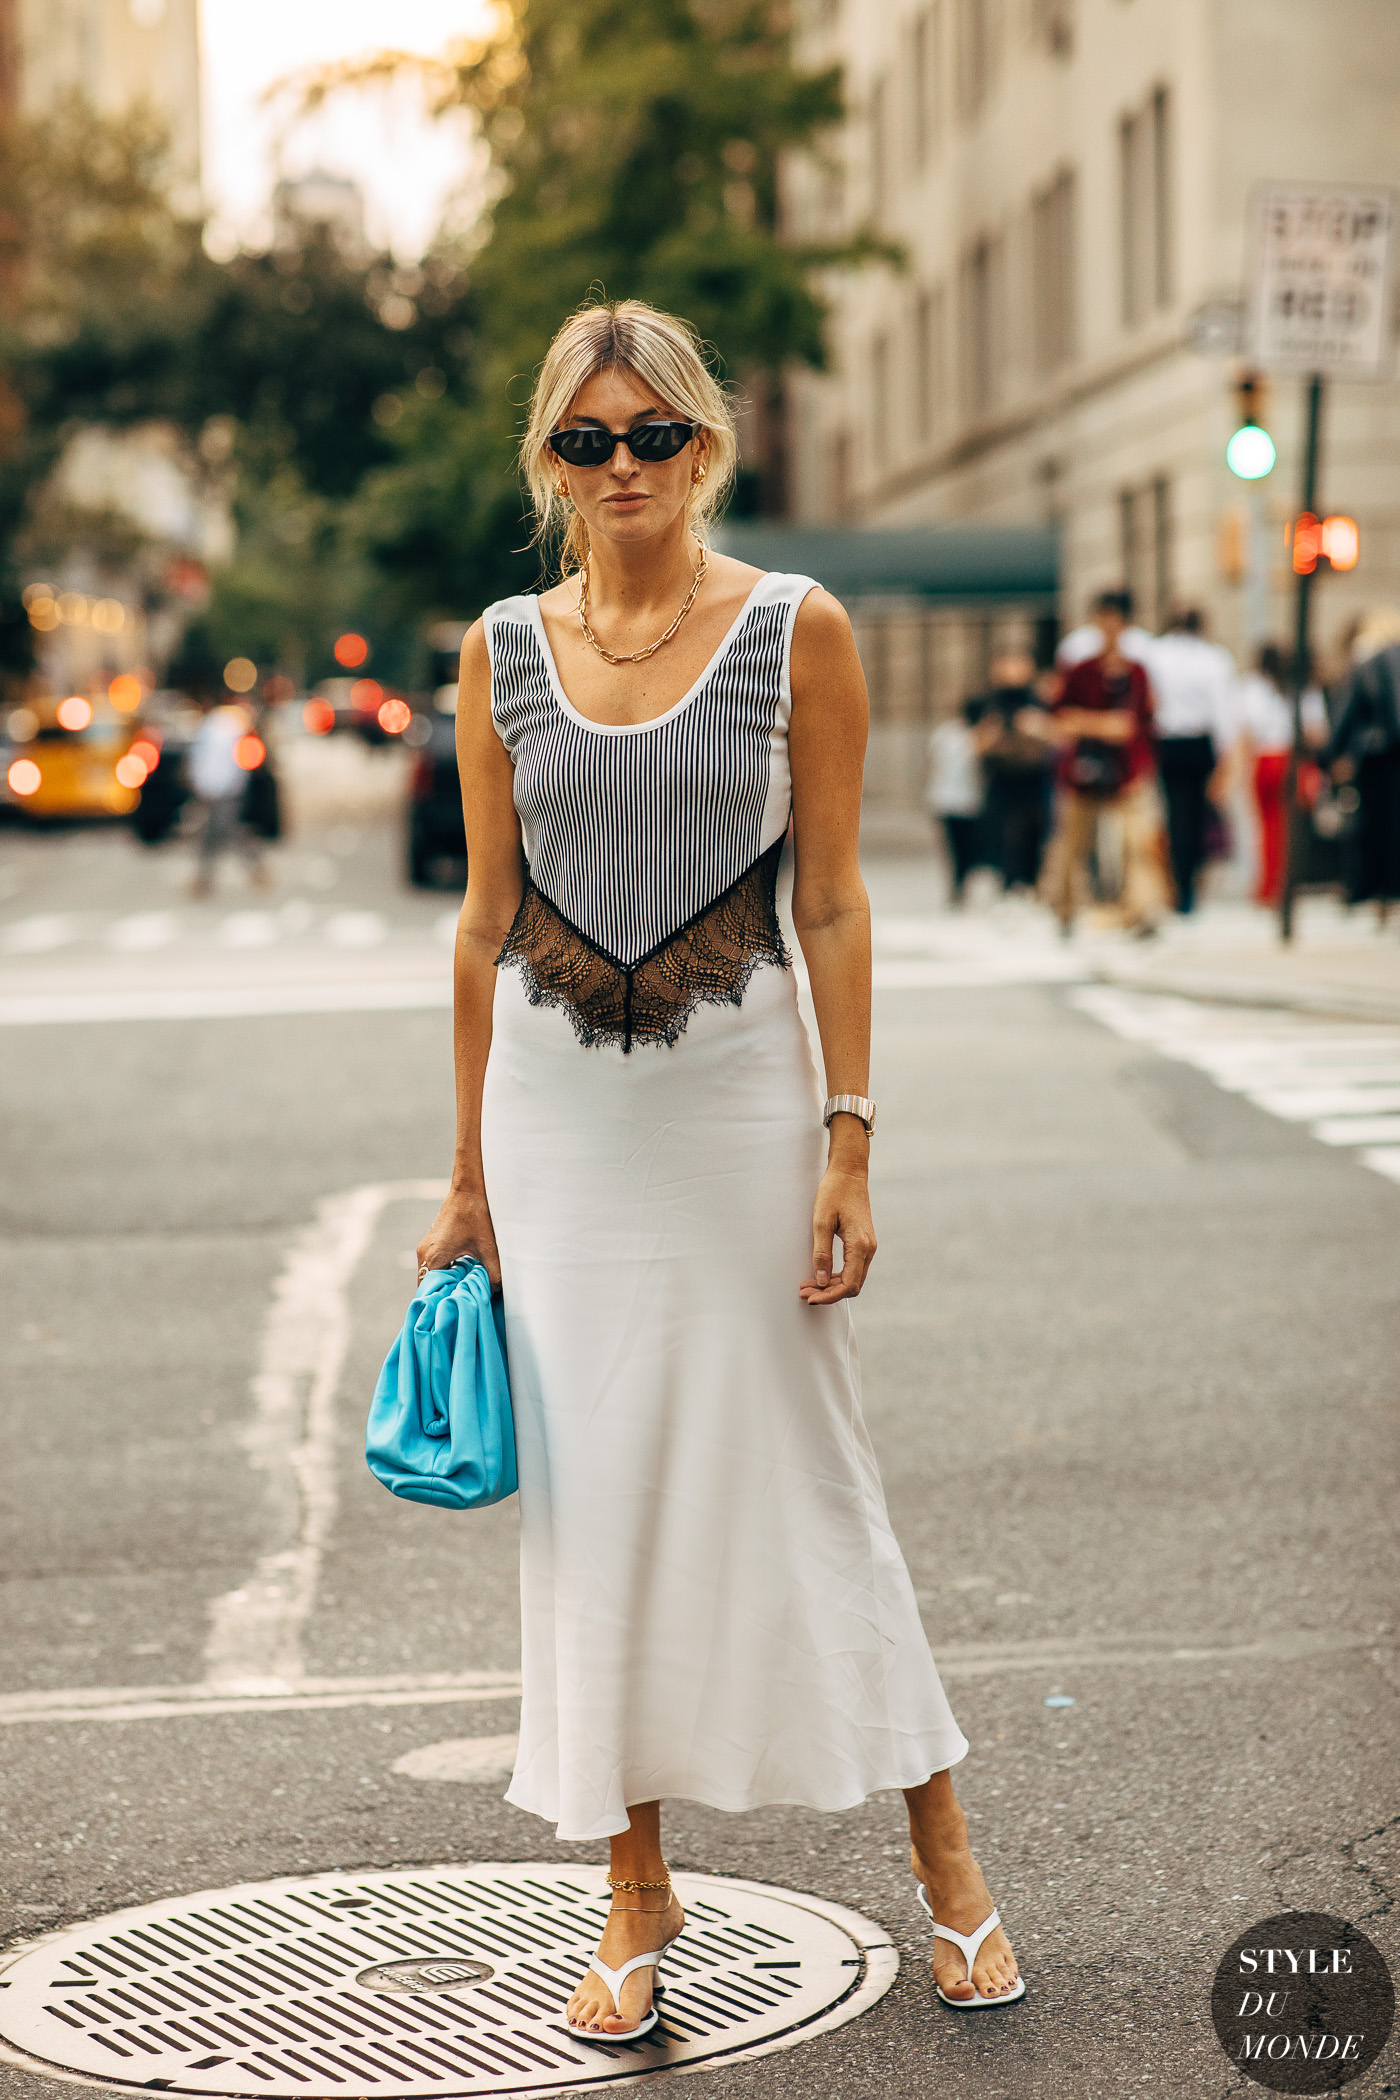 New York SS 2020 Street Style: Camille Charriere - STYLE DU MONDE